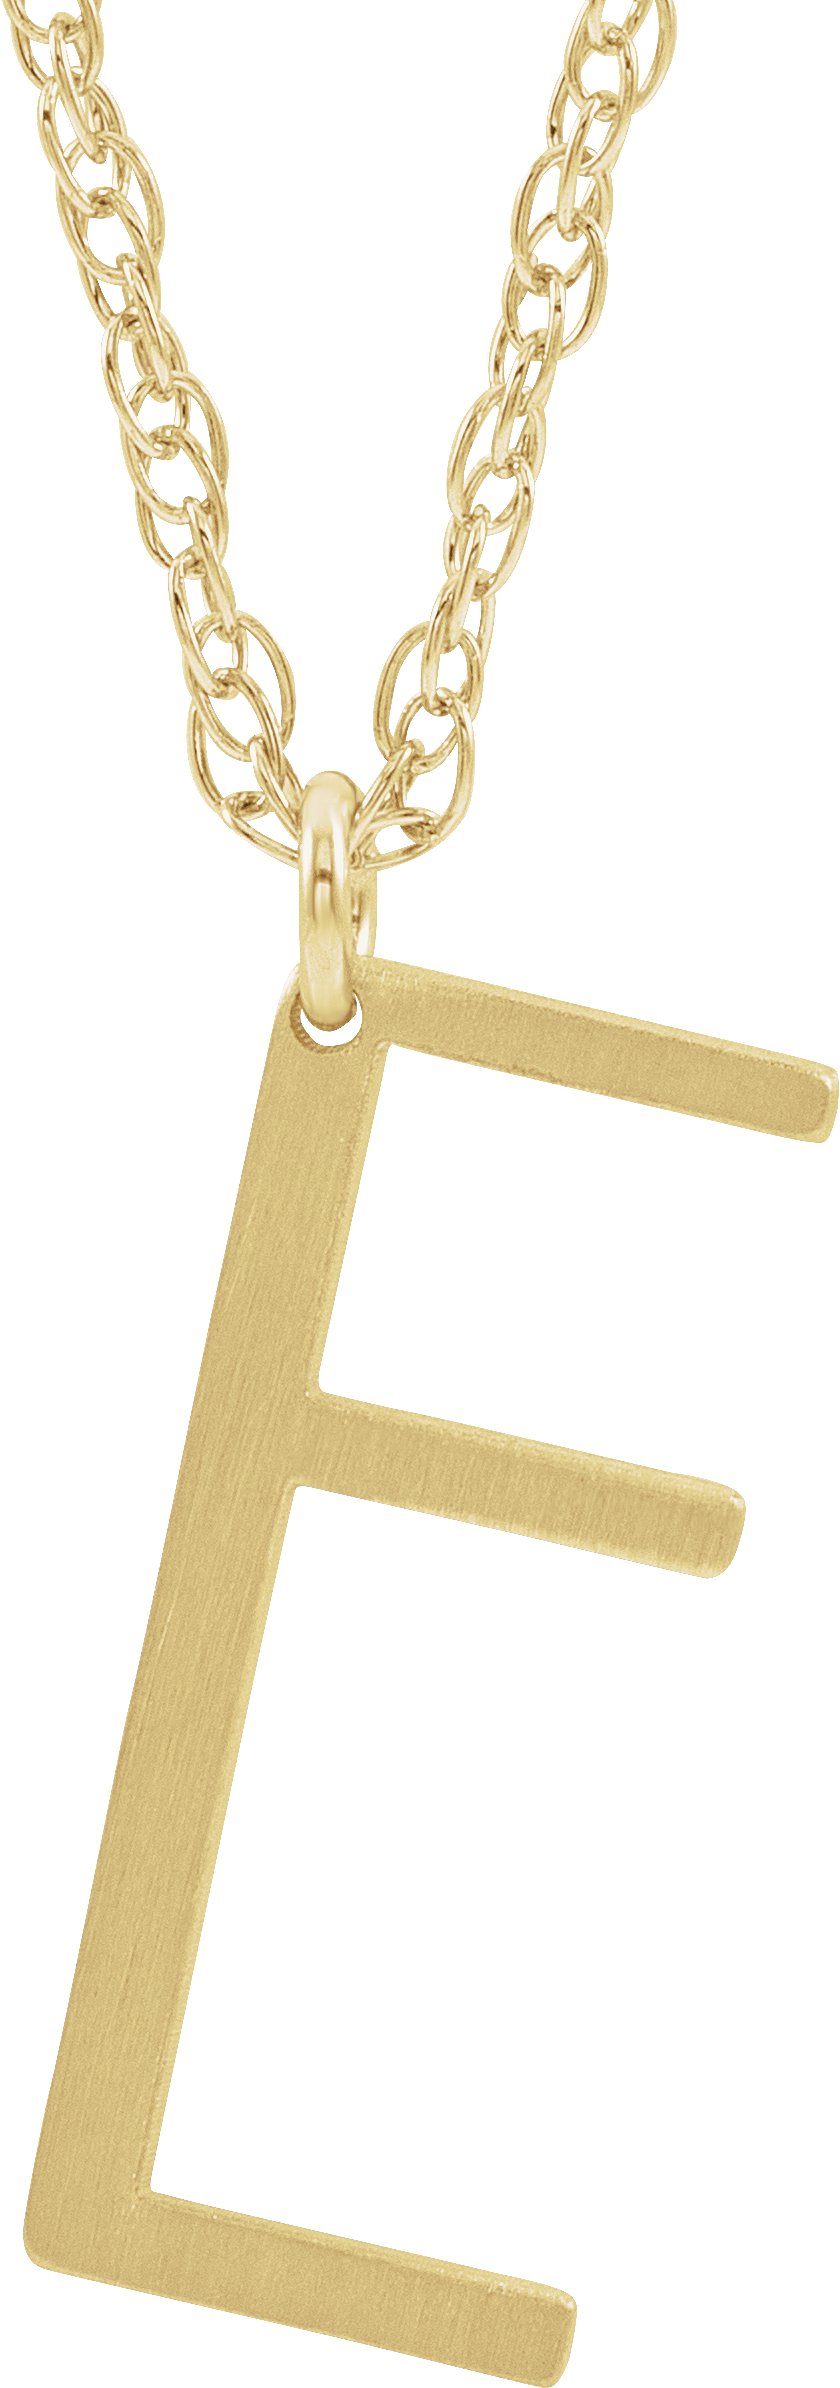 14K Yellow Gold-Plated Sterling Silver Block Initial E 16-18" Necklace with Brush Finish